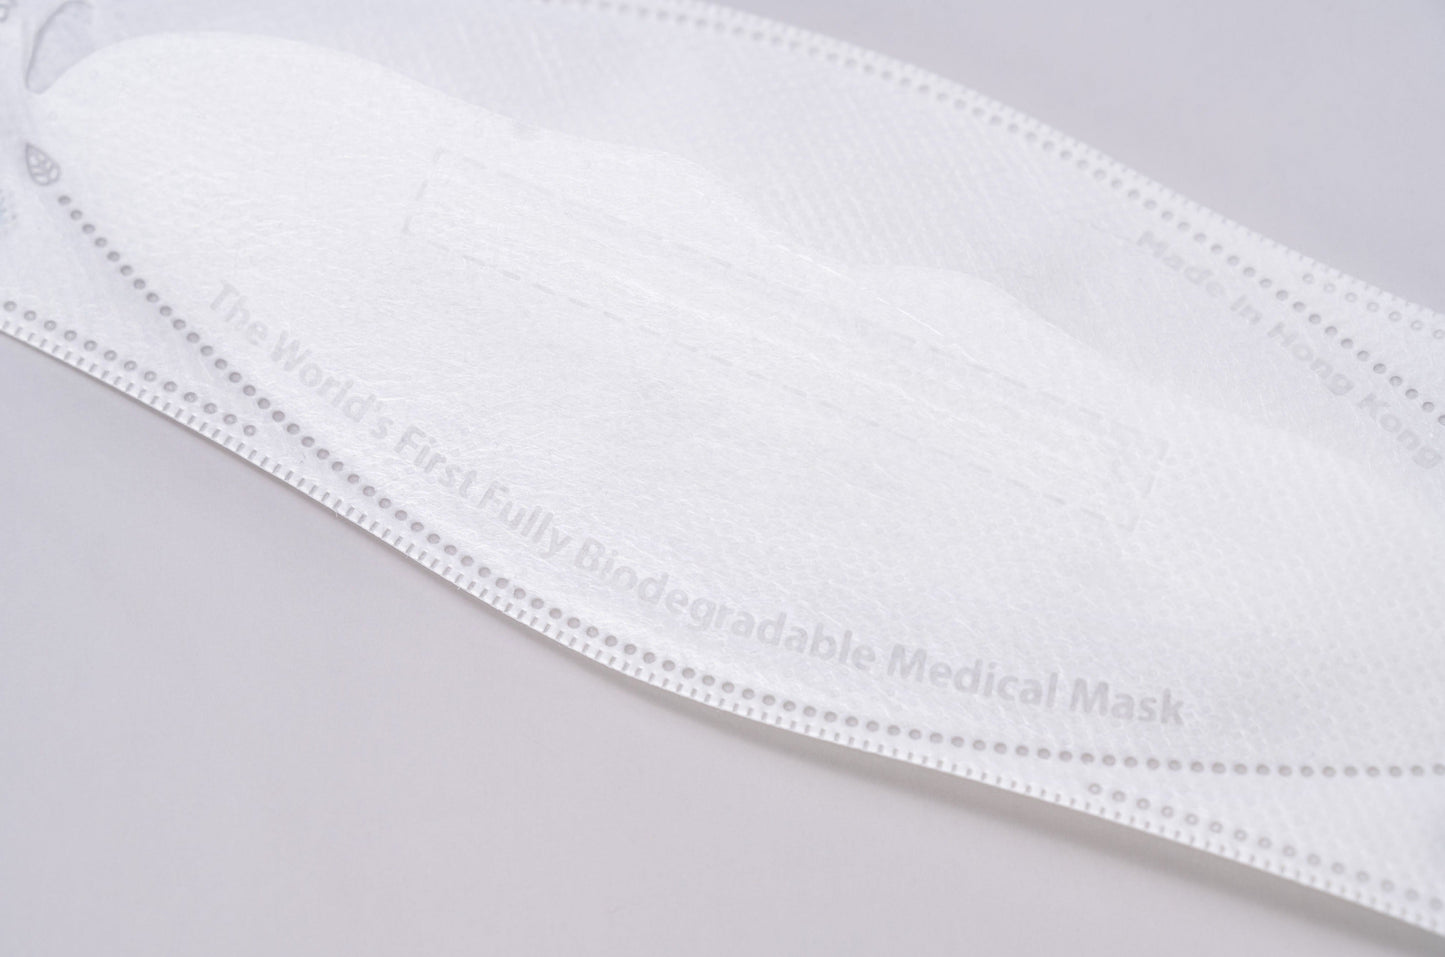 ÖKOSIX® Fully Biodegradable Level 3 Surgical Mask - Adult S - White - 6 pieces per box